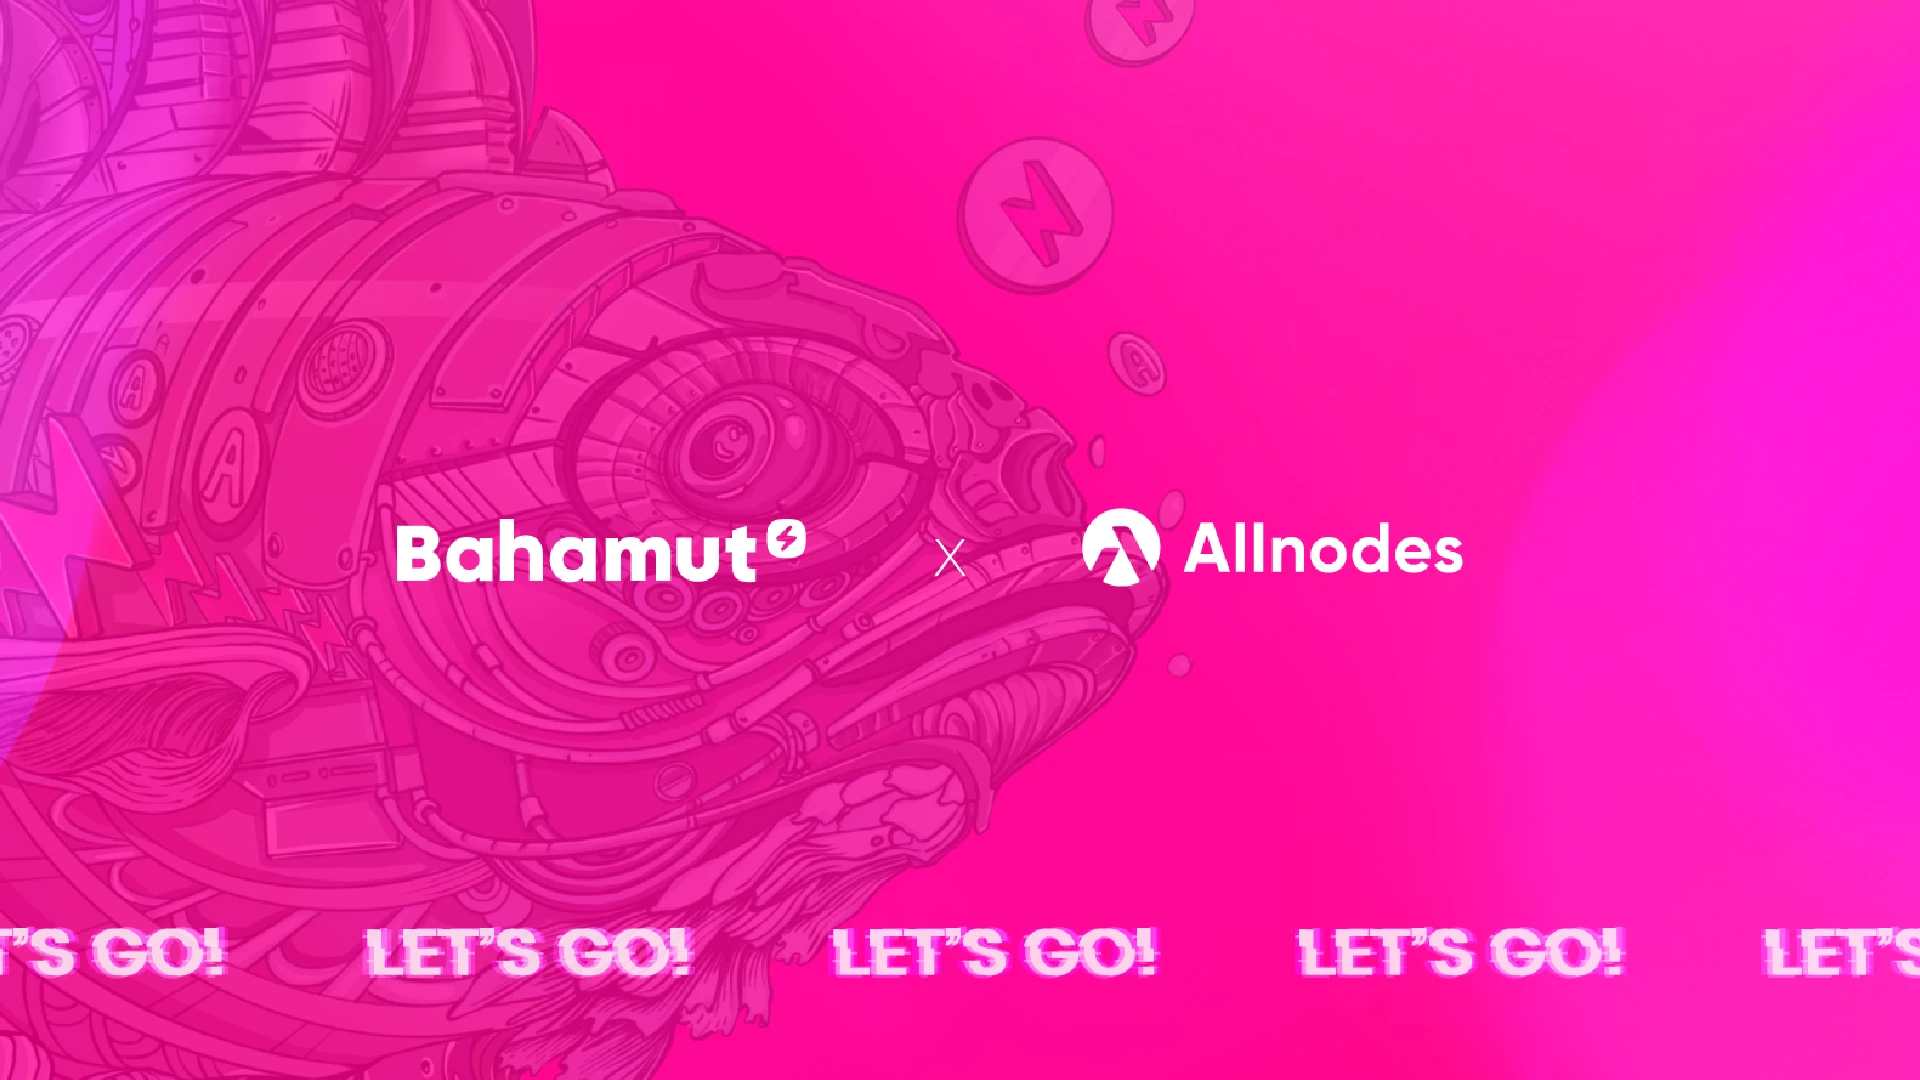 Bahamut announces a new partnership, this time with Allnodes